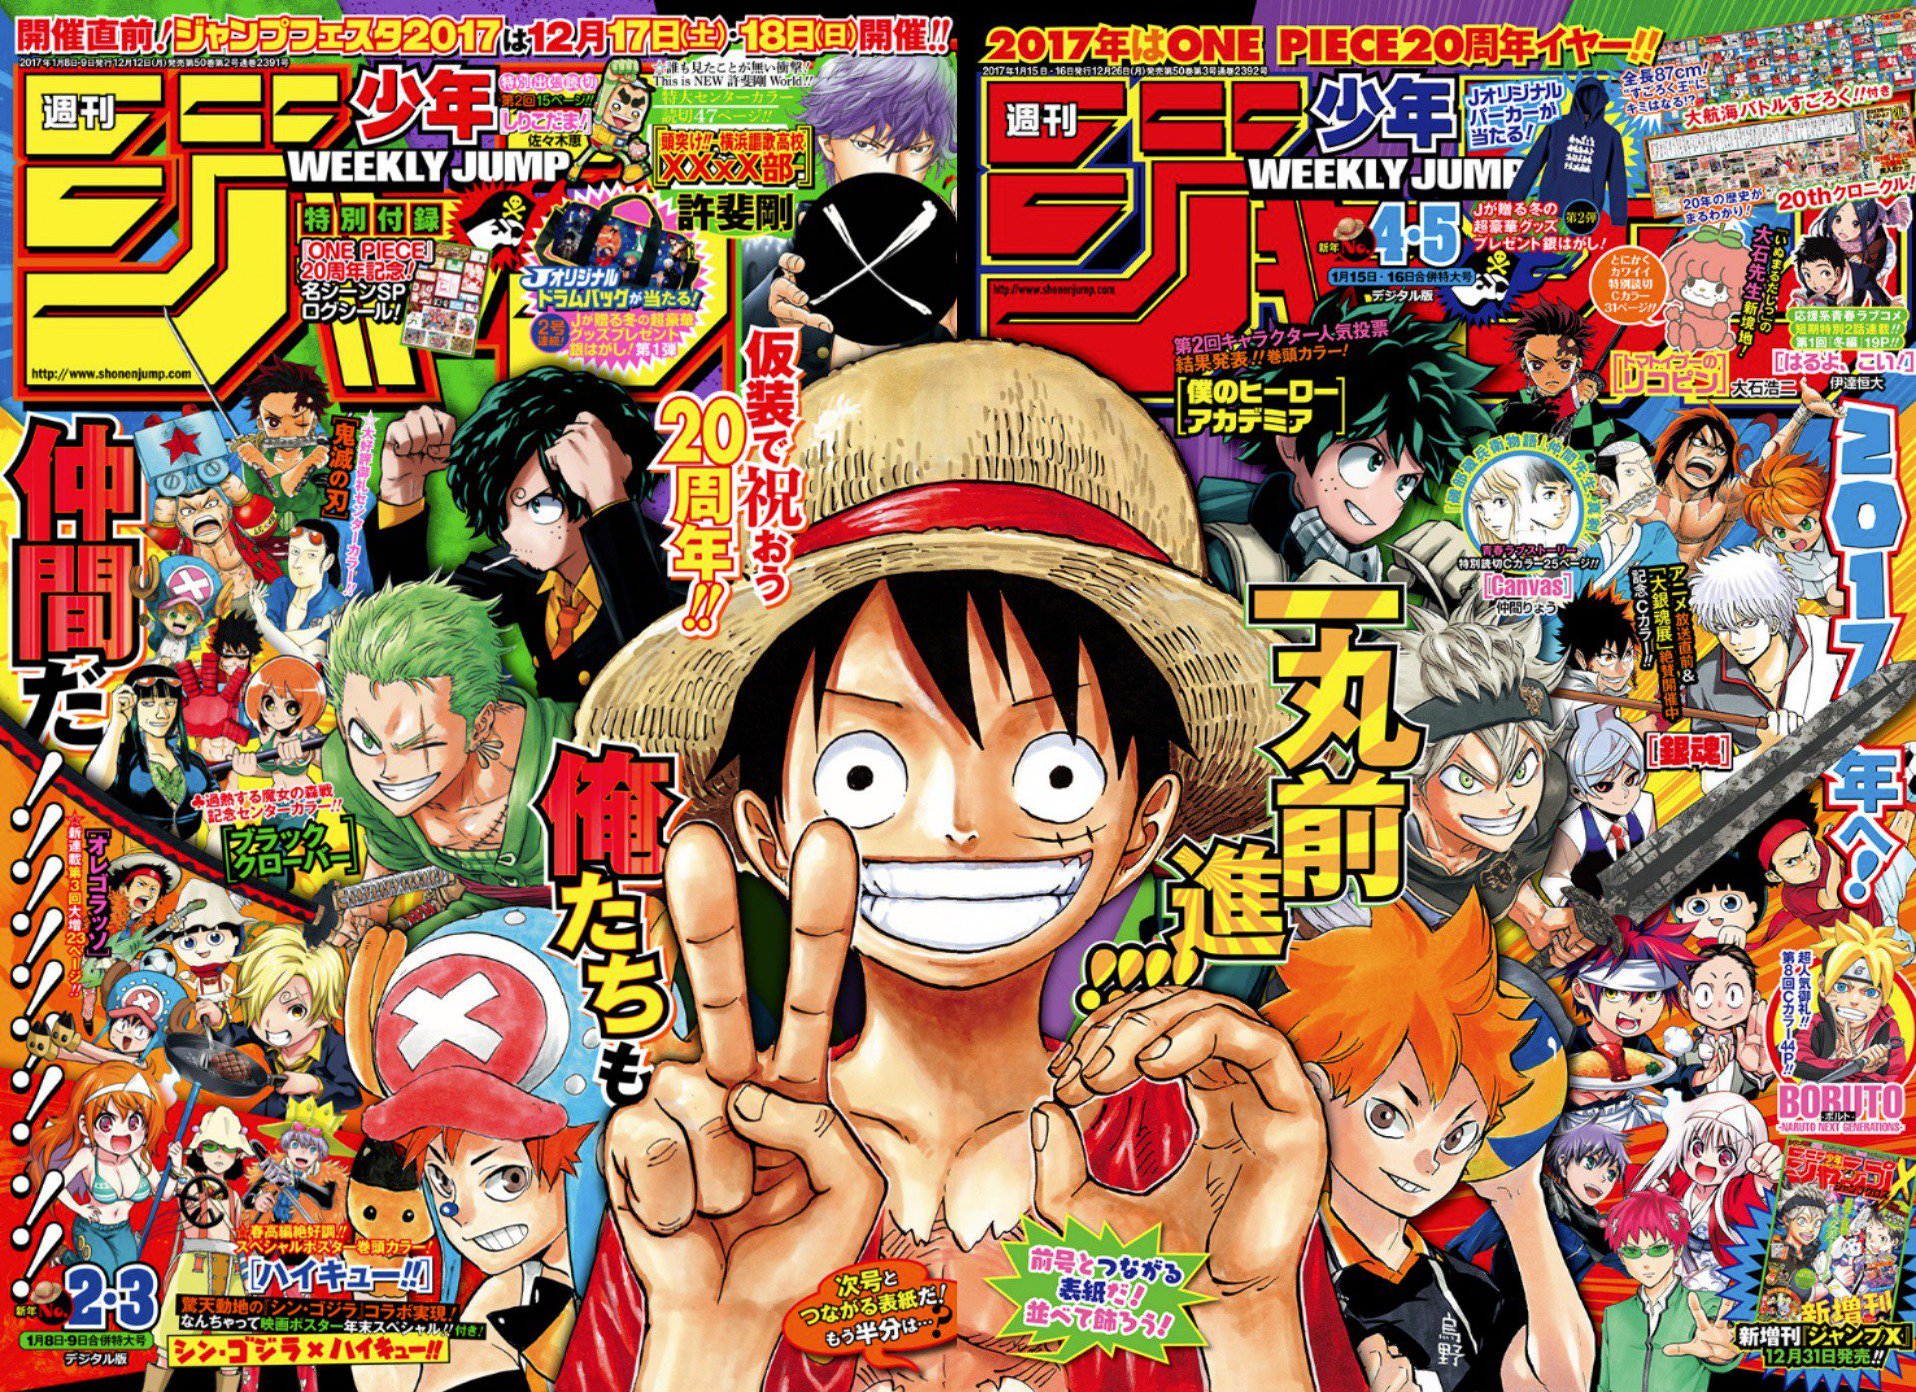 One Piece Celebrates Its 20th Anniversary In 2017 Page 3